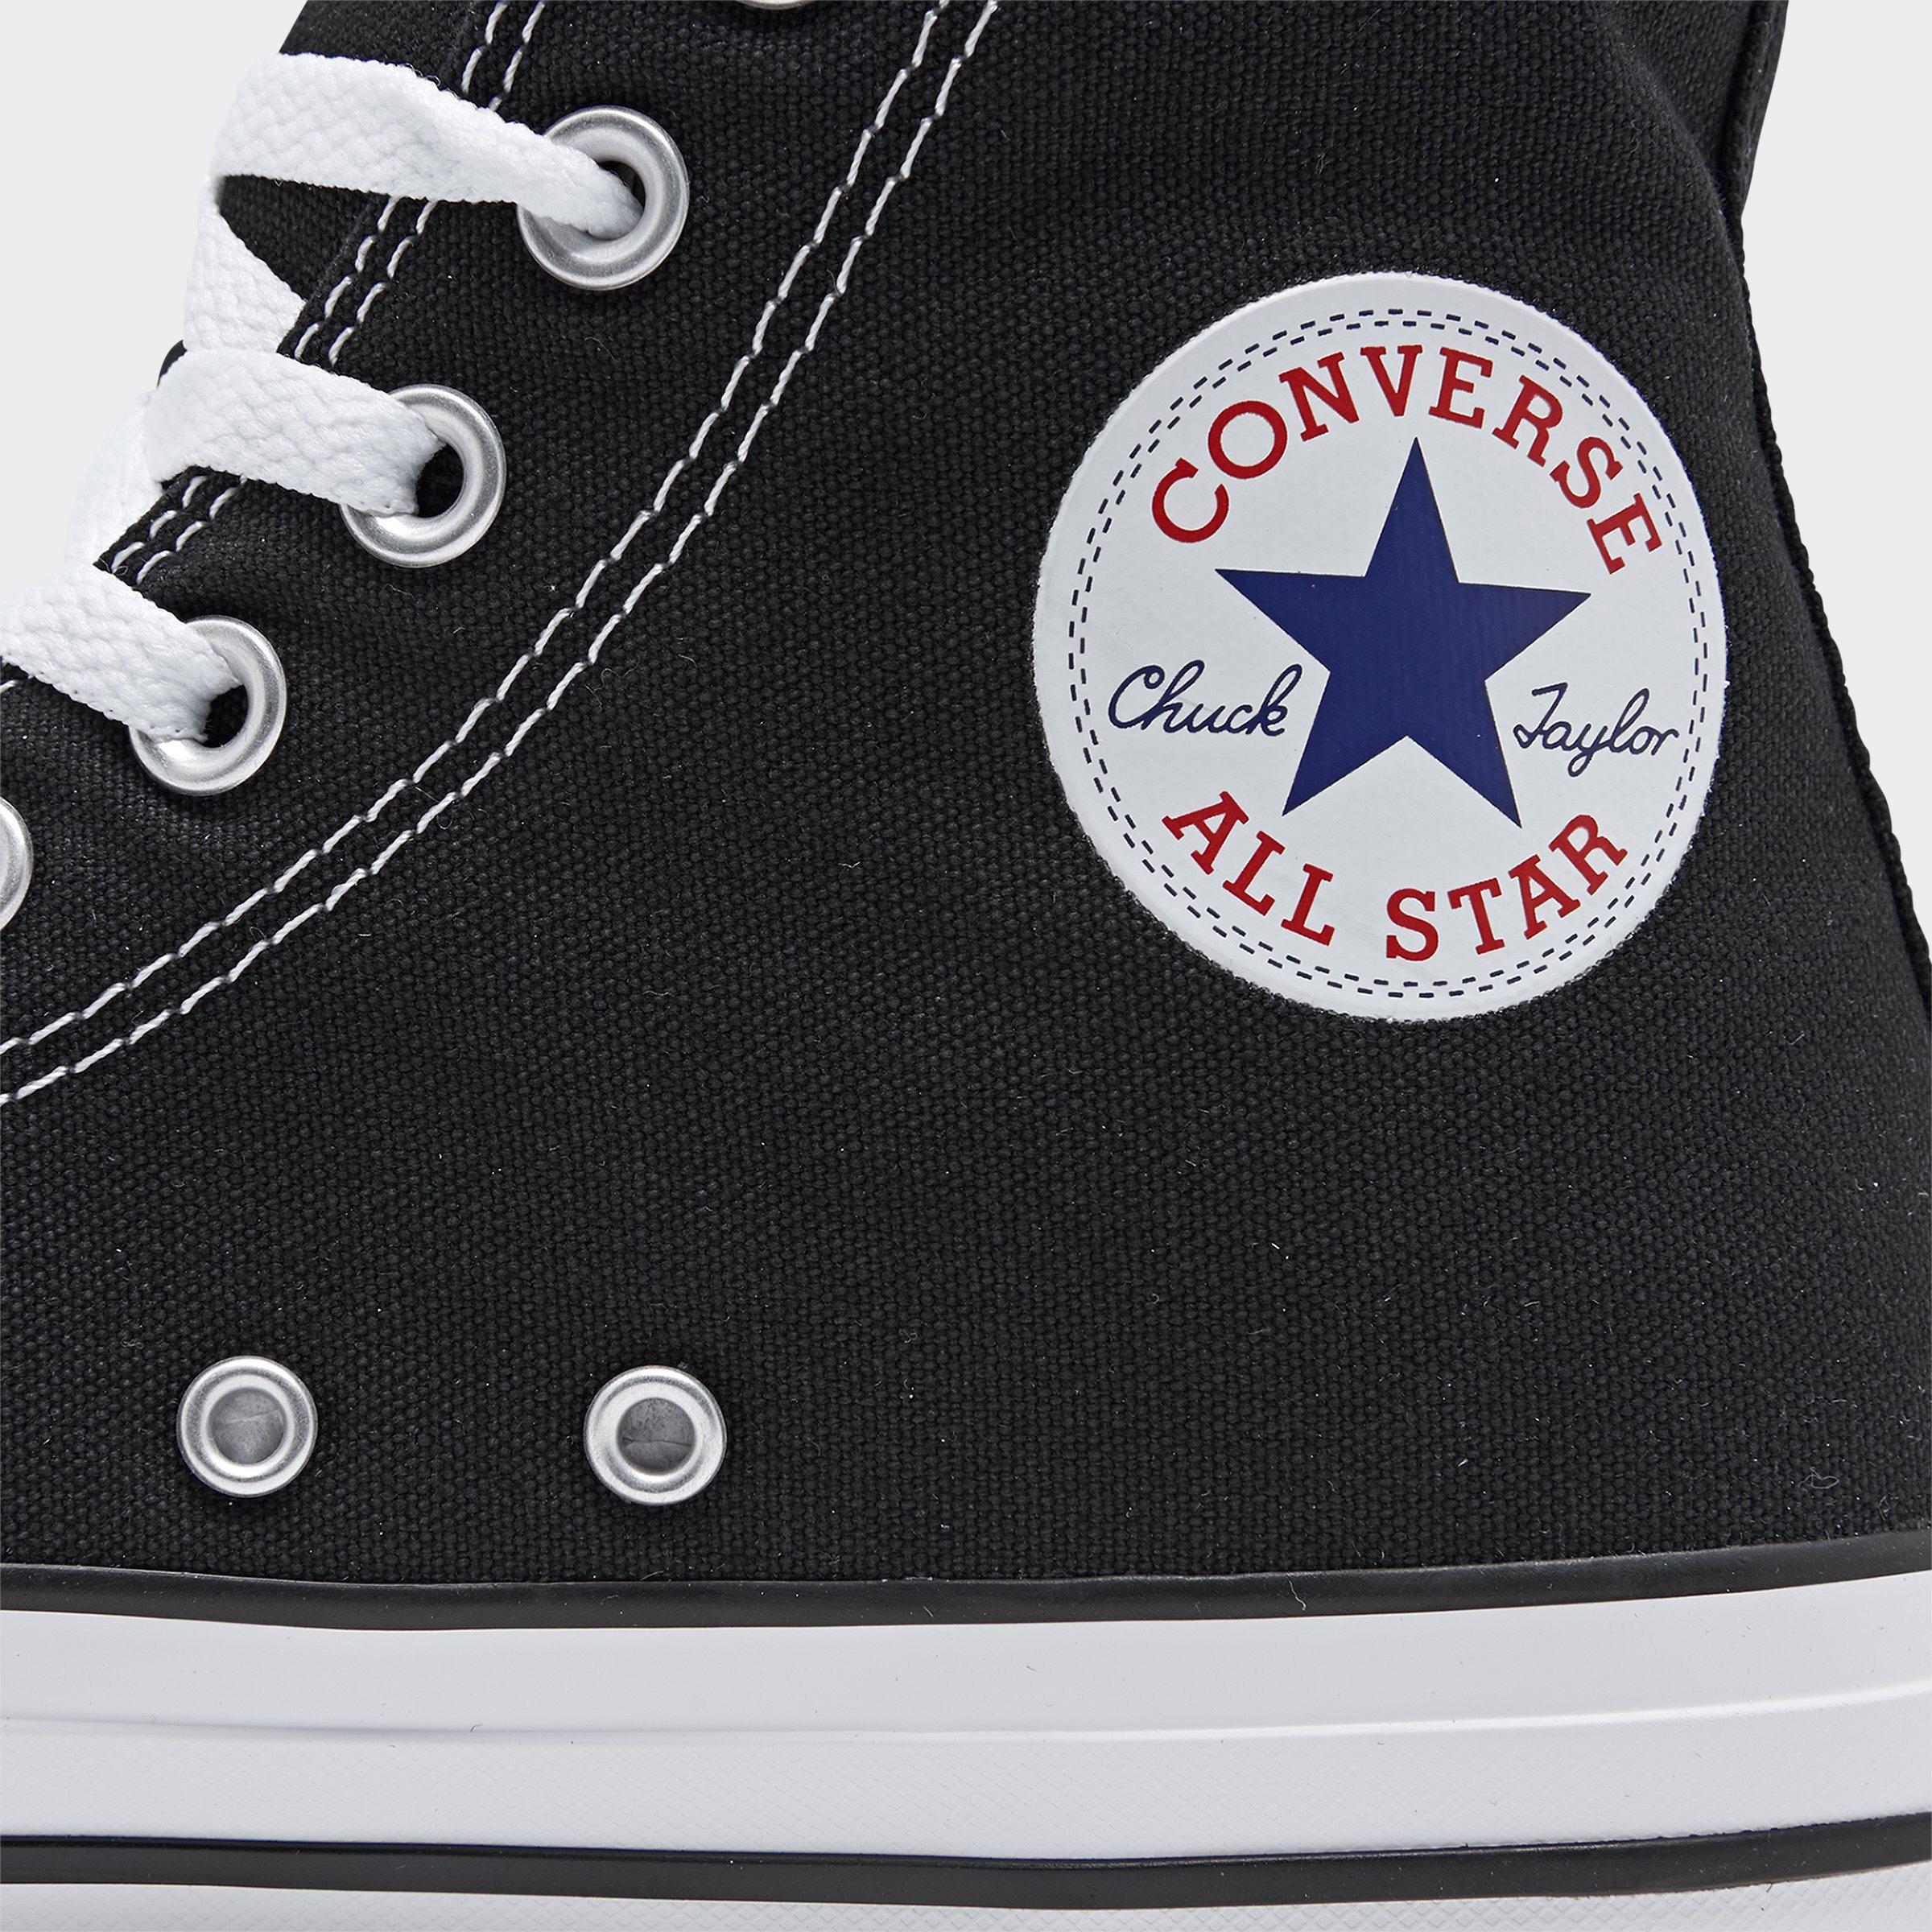 Women's Converse Chuck Taylor All Star High Top Casual Shoes (Big Kids'  Sizes Available)| Finish Line